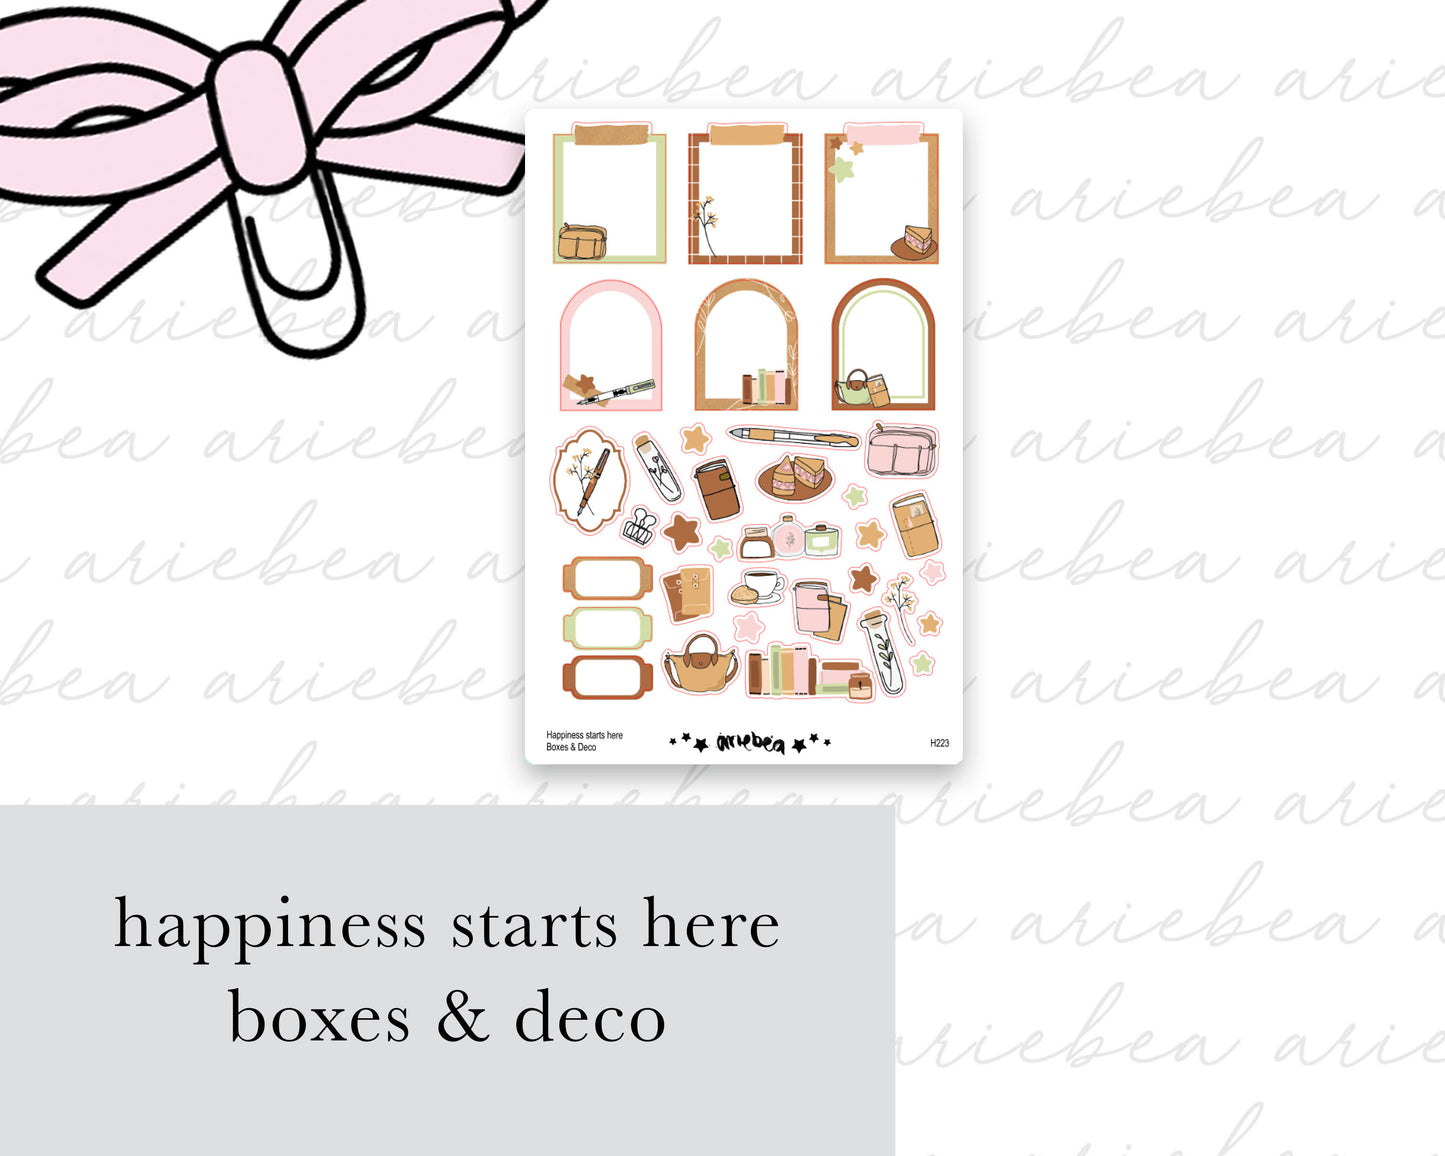 Happiness Starts Here Collection Boxes & Deco